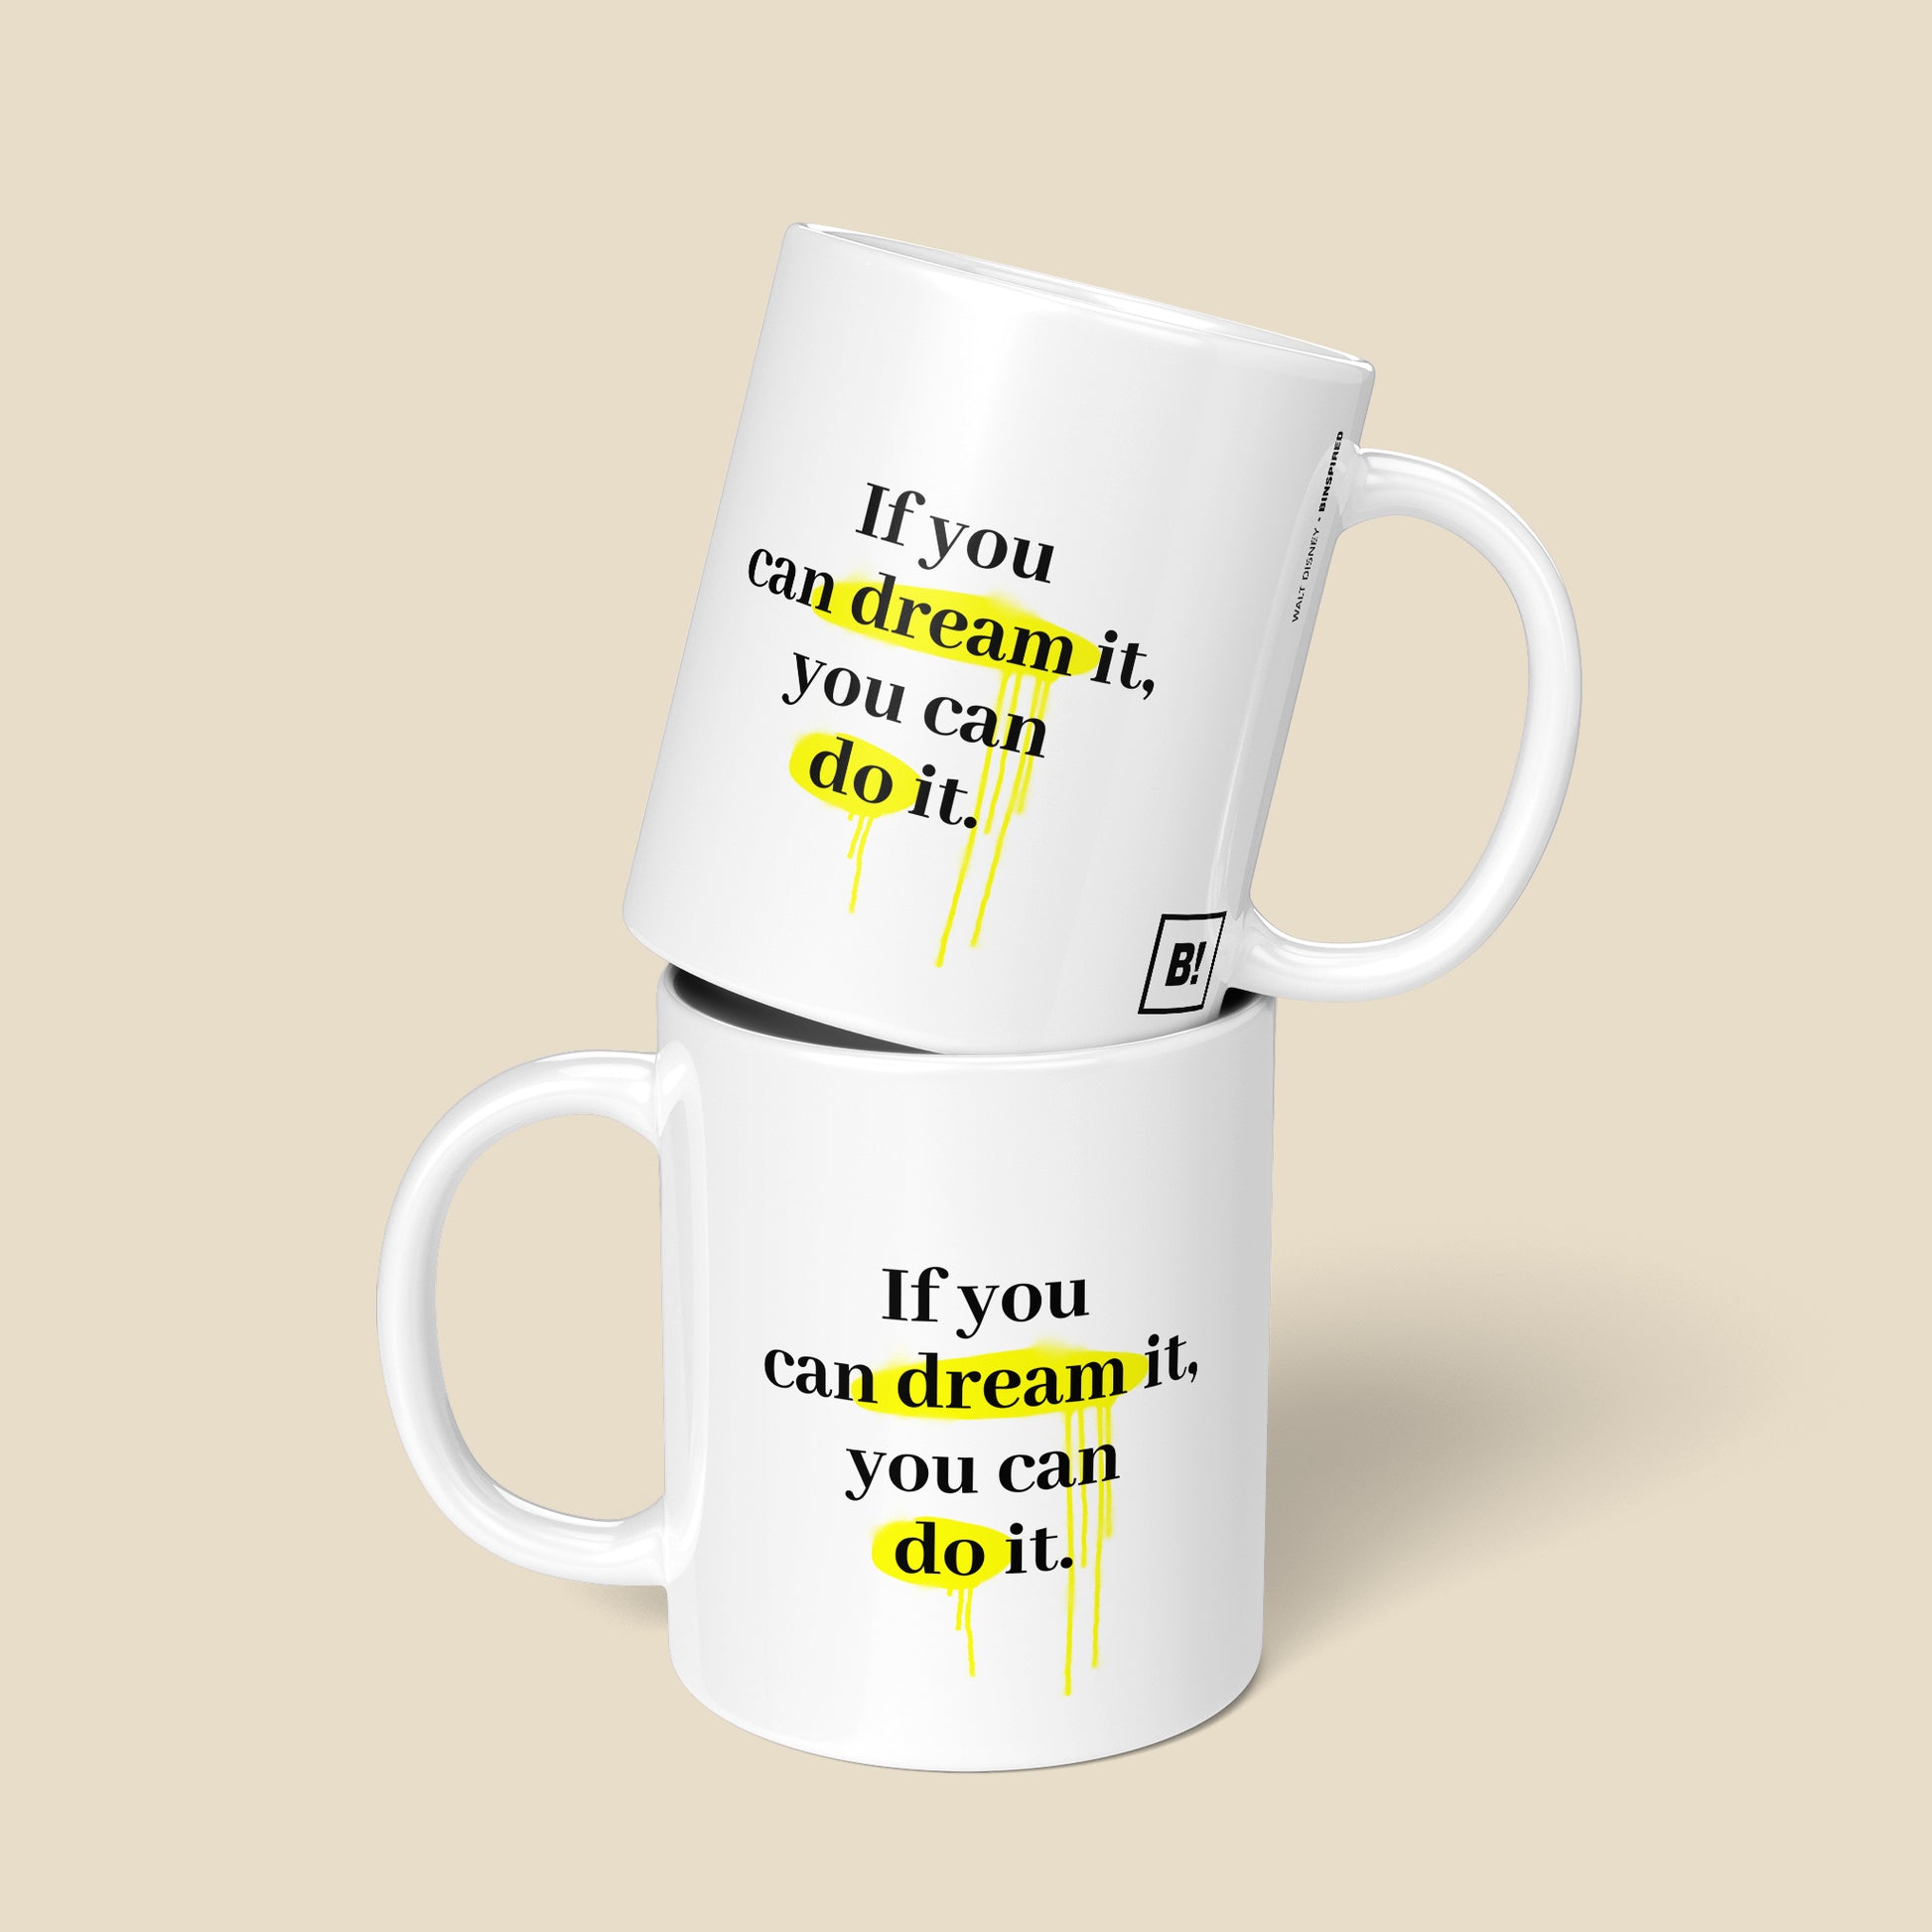 Be inspired by Walt Disney's famous quote, "If you can dream it, you can do it" on this 11oz white glossy coffee mug with a front and back view.